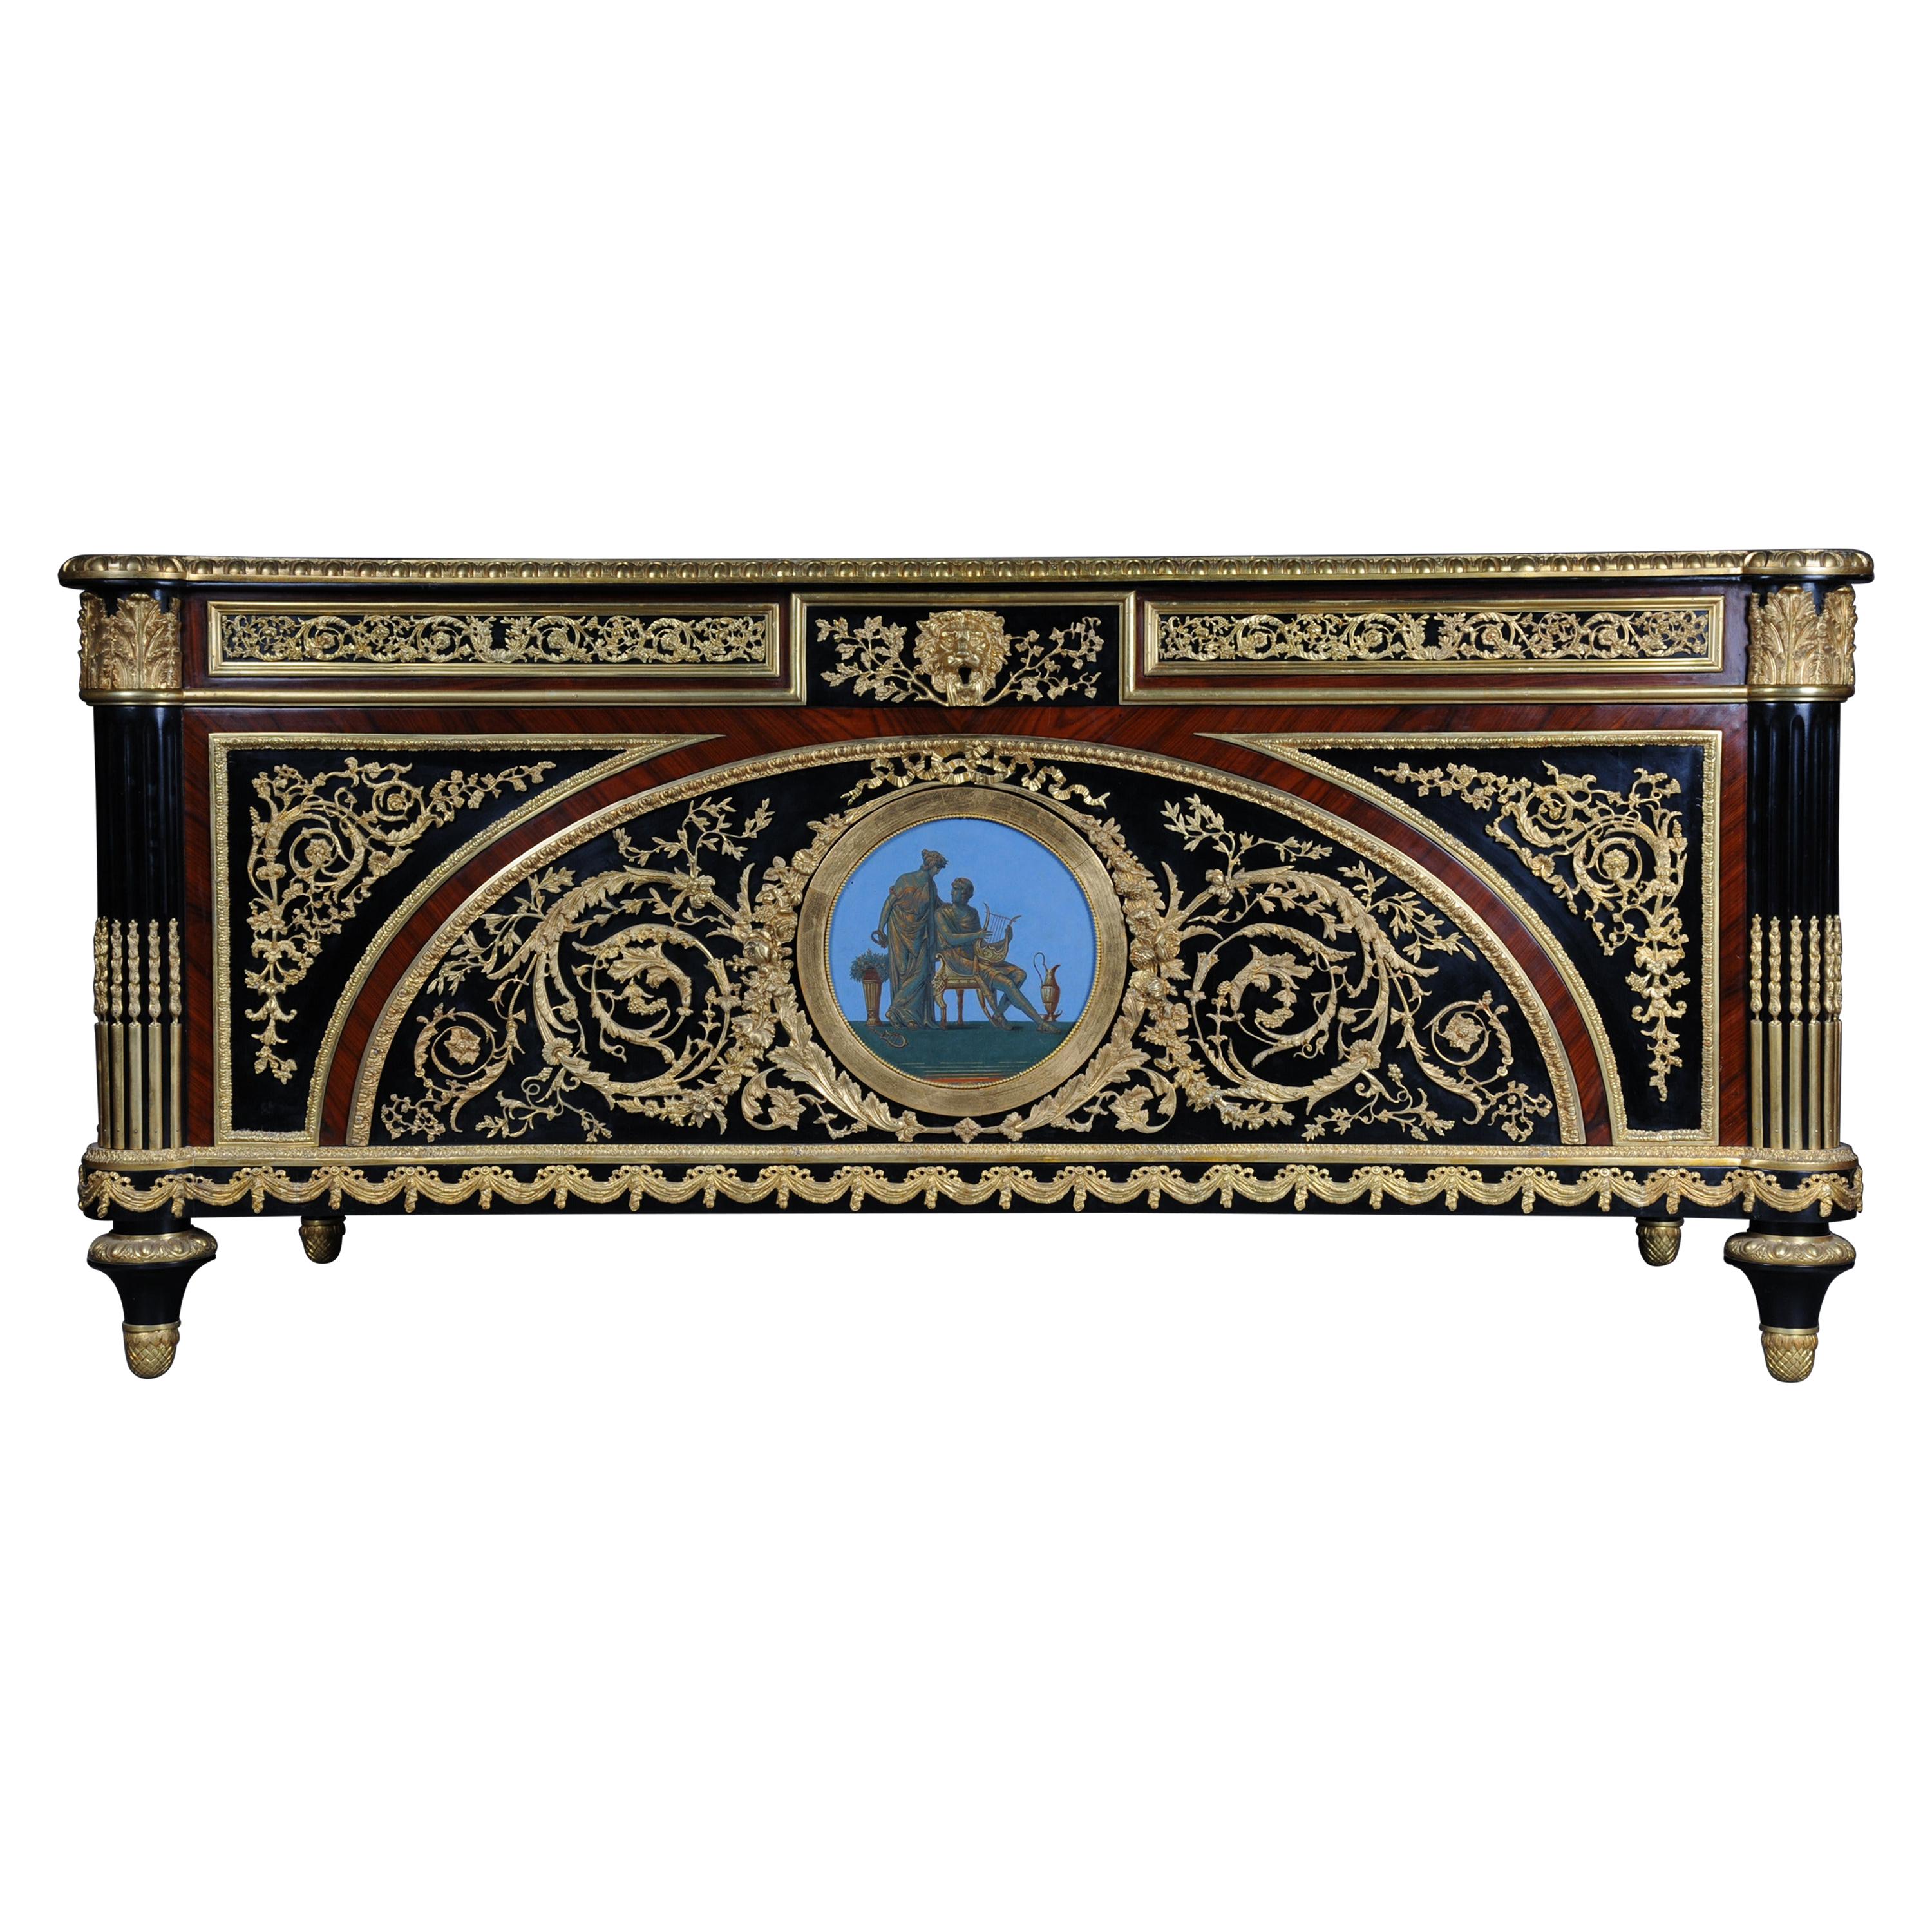 20th Century Imperial Bureau Plat / Writing Desk in the Style of Louis XVI